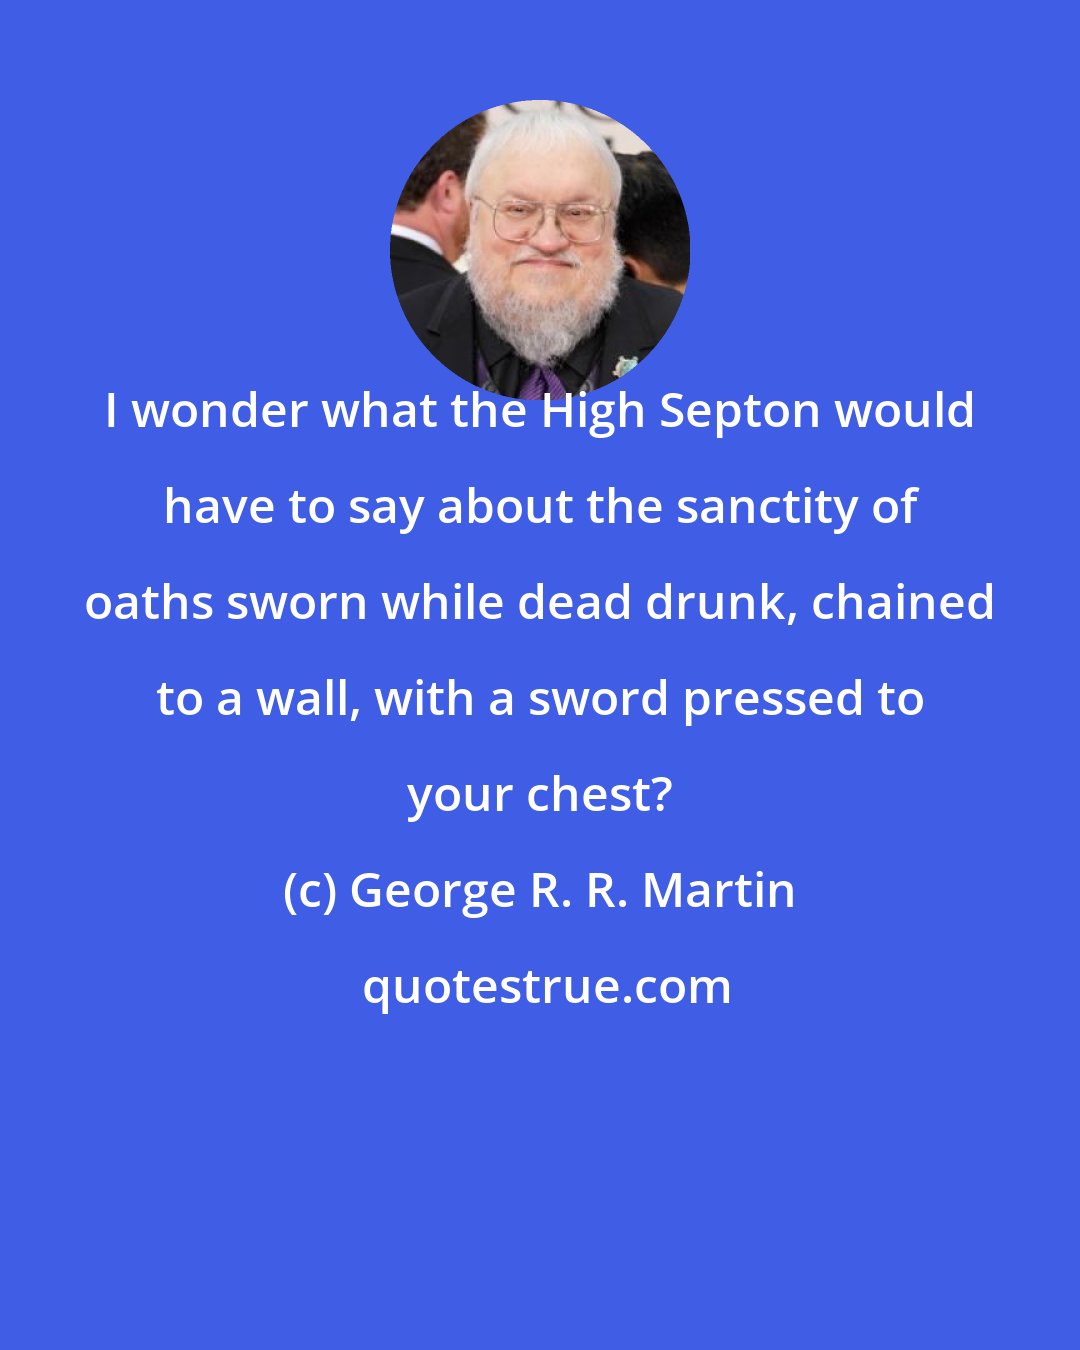 George R. R. Martin: I wonder what the High Septon would have to say about the sanctity of oaths sworn while dead drunk, chained to a wall, with a sword pressed to your chest?